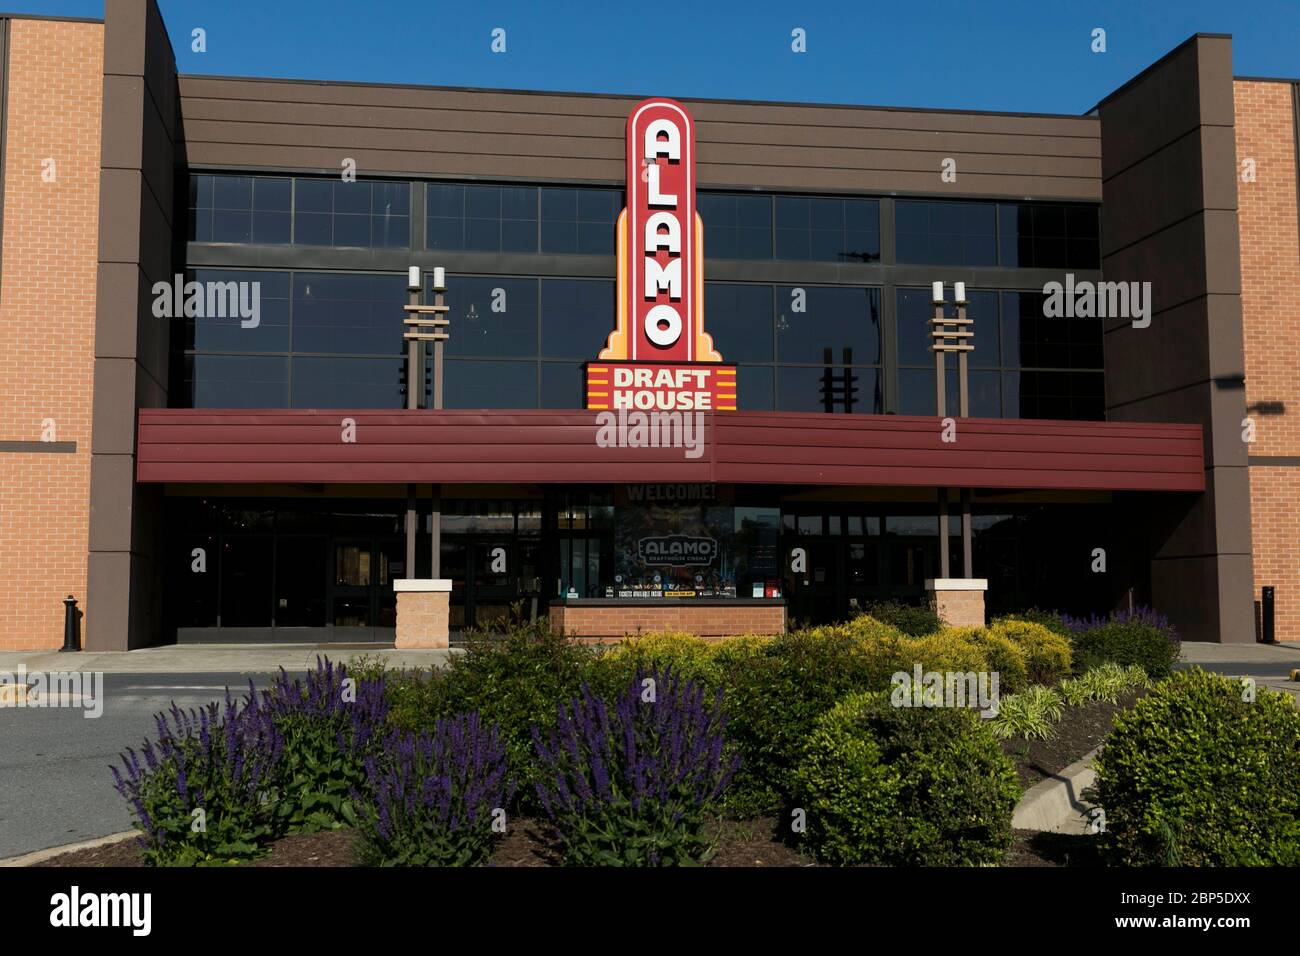 A logo sign outside of a The Alamo Drafthouse Cinema movie theater location in Winchester, Virginia on May 13, 2020. Stock Photo